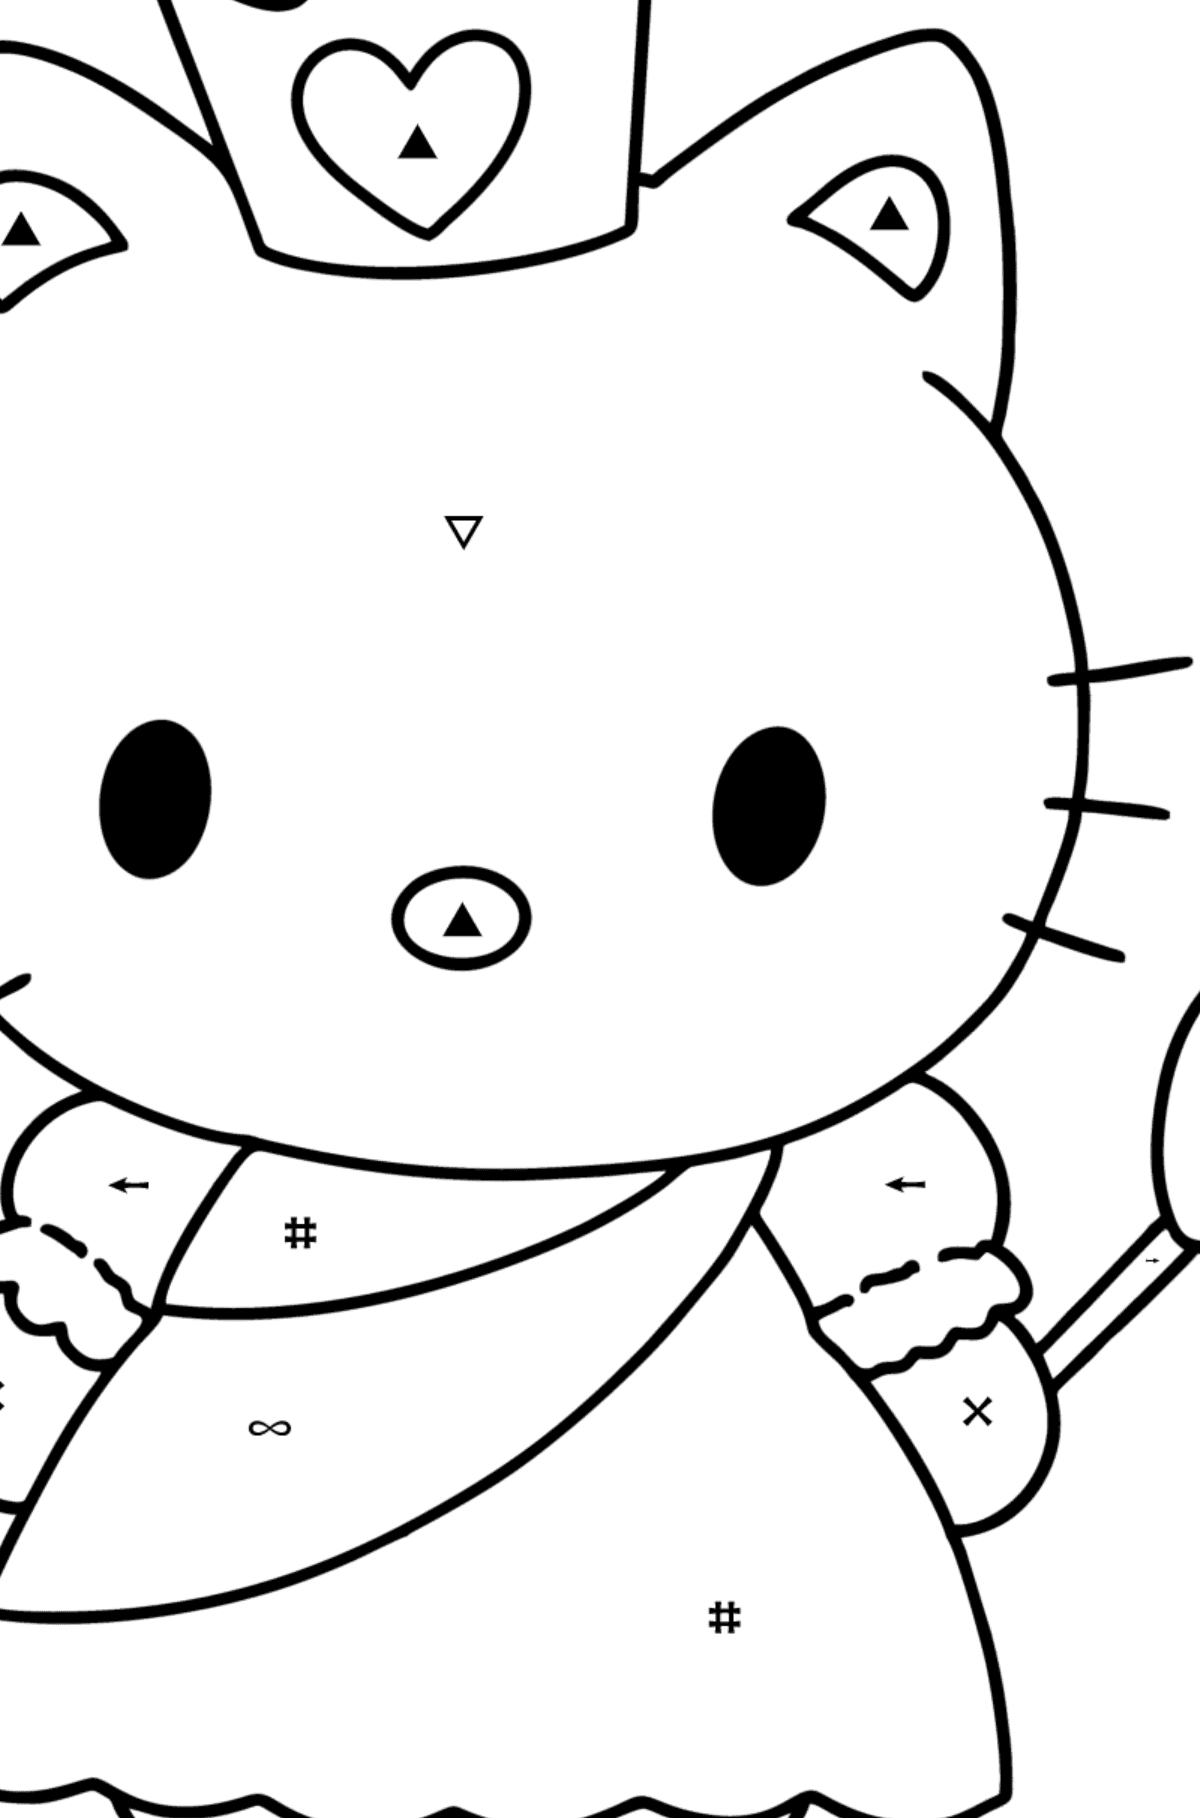 Hello Kitty Princess coloring page - Coloring by Symbols for Kids